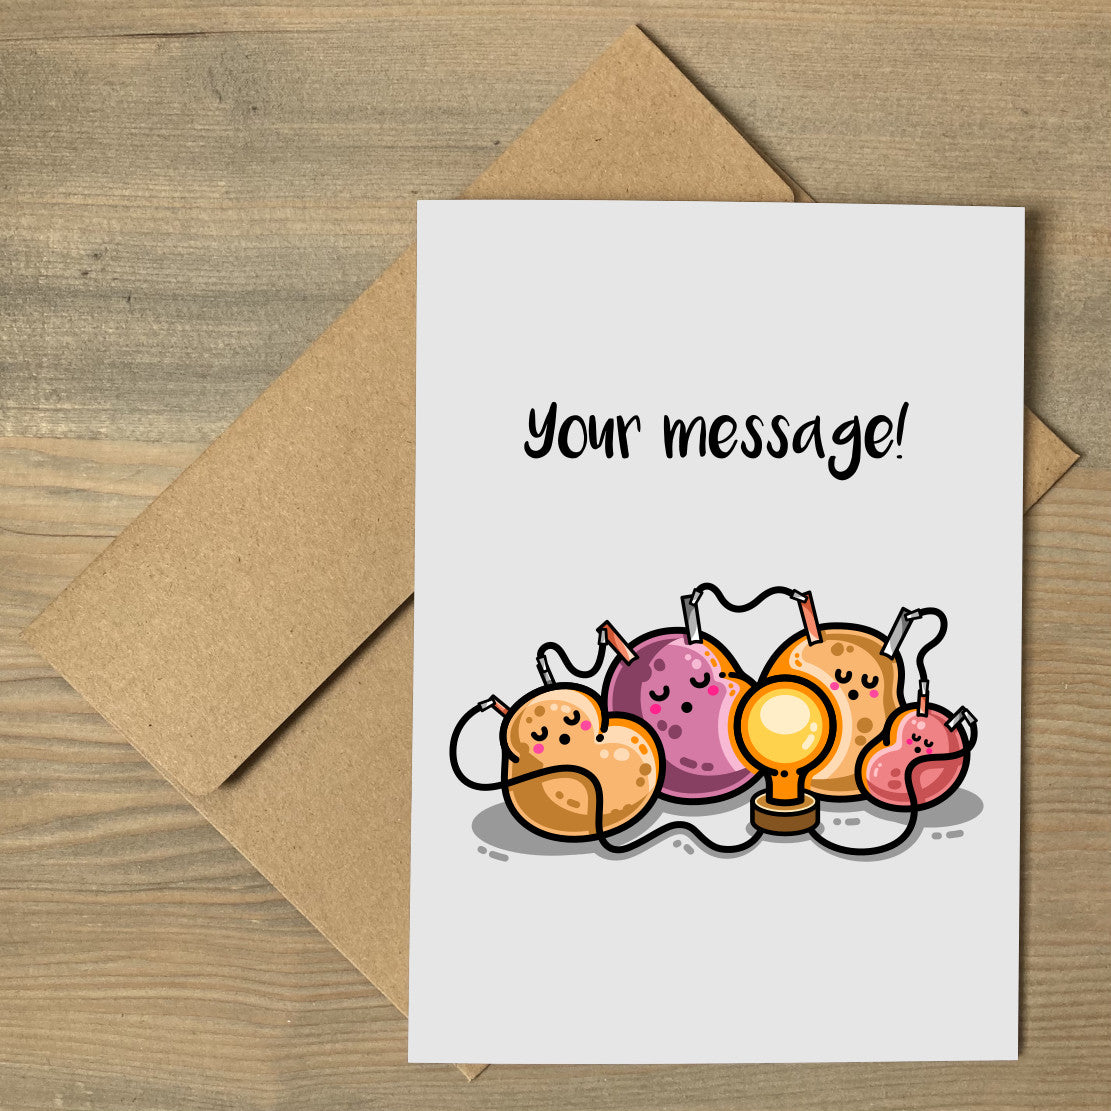 A pale grey greeting card lying flat on a brown envelope, with a design of a potato battery of 4 potatoes asleep around a light bulb they are powering and the words 'your message' written above